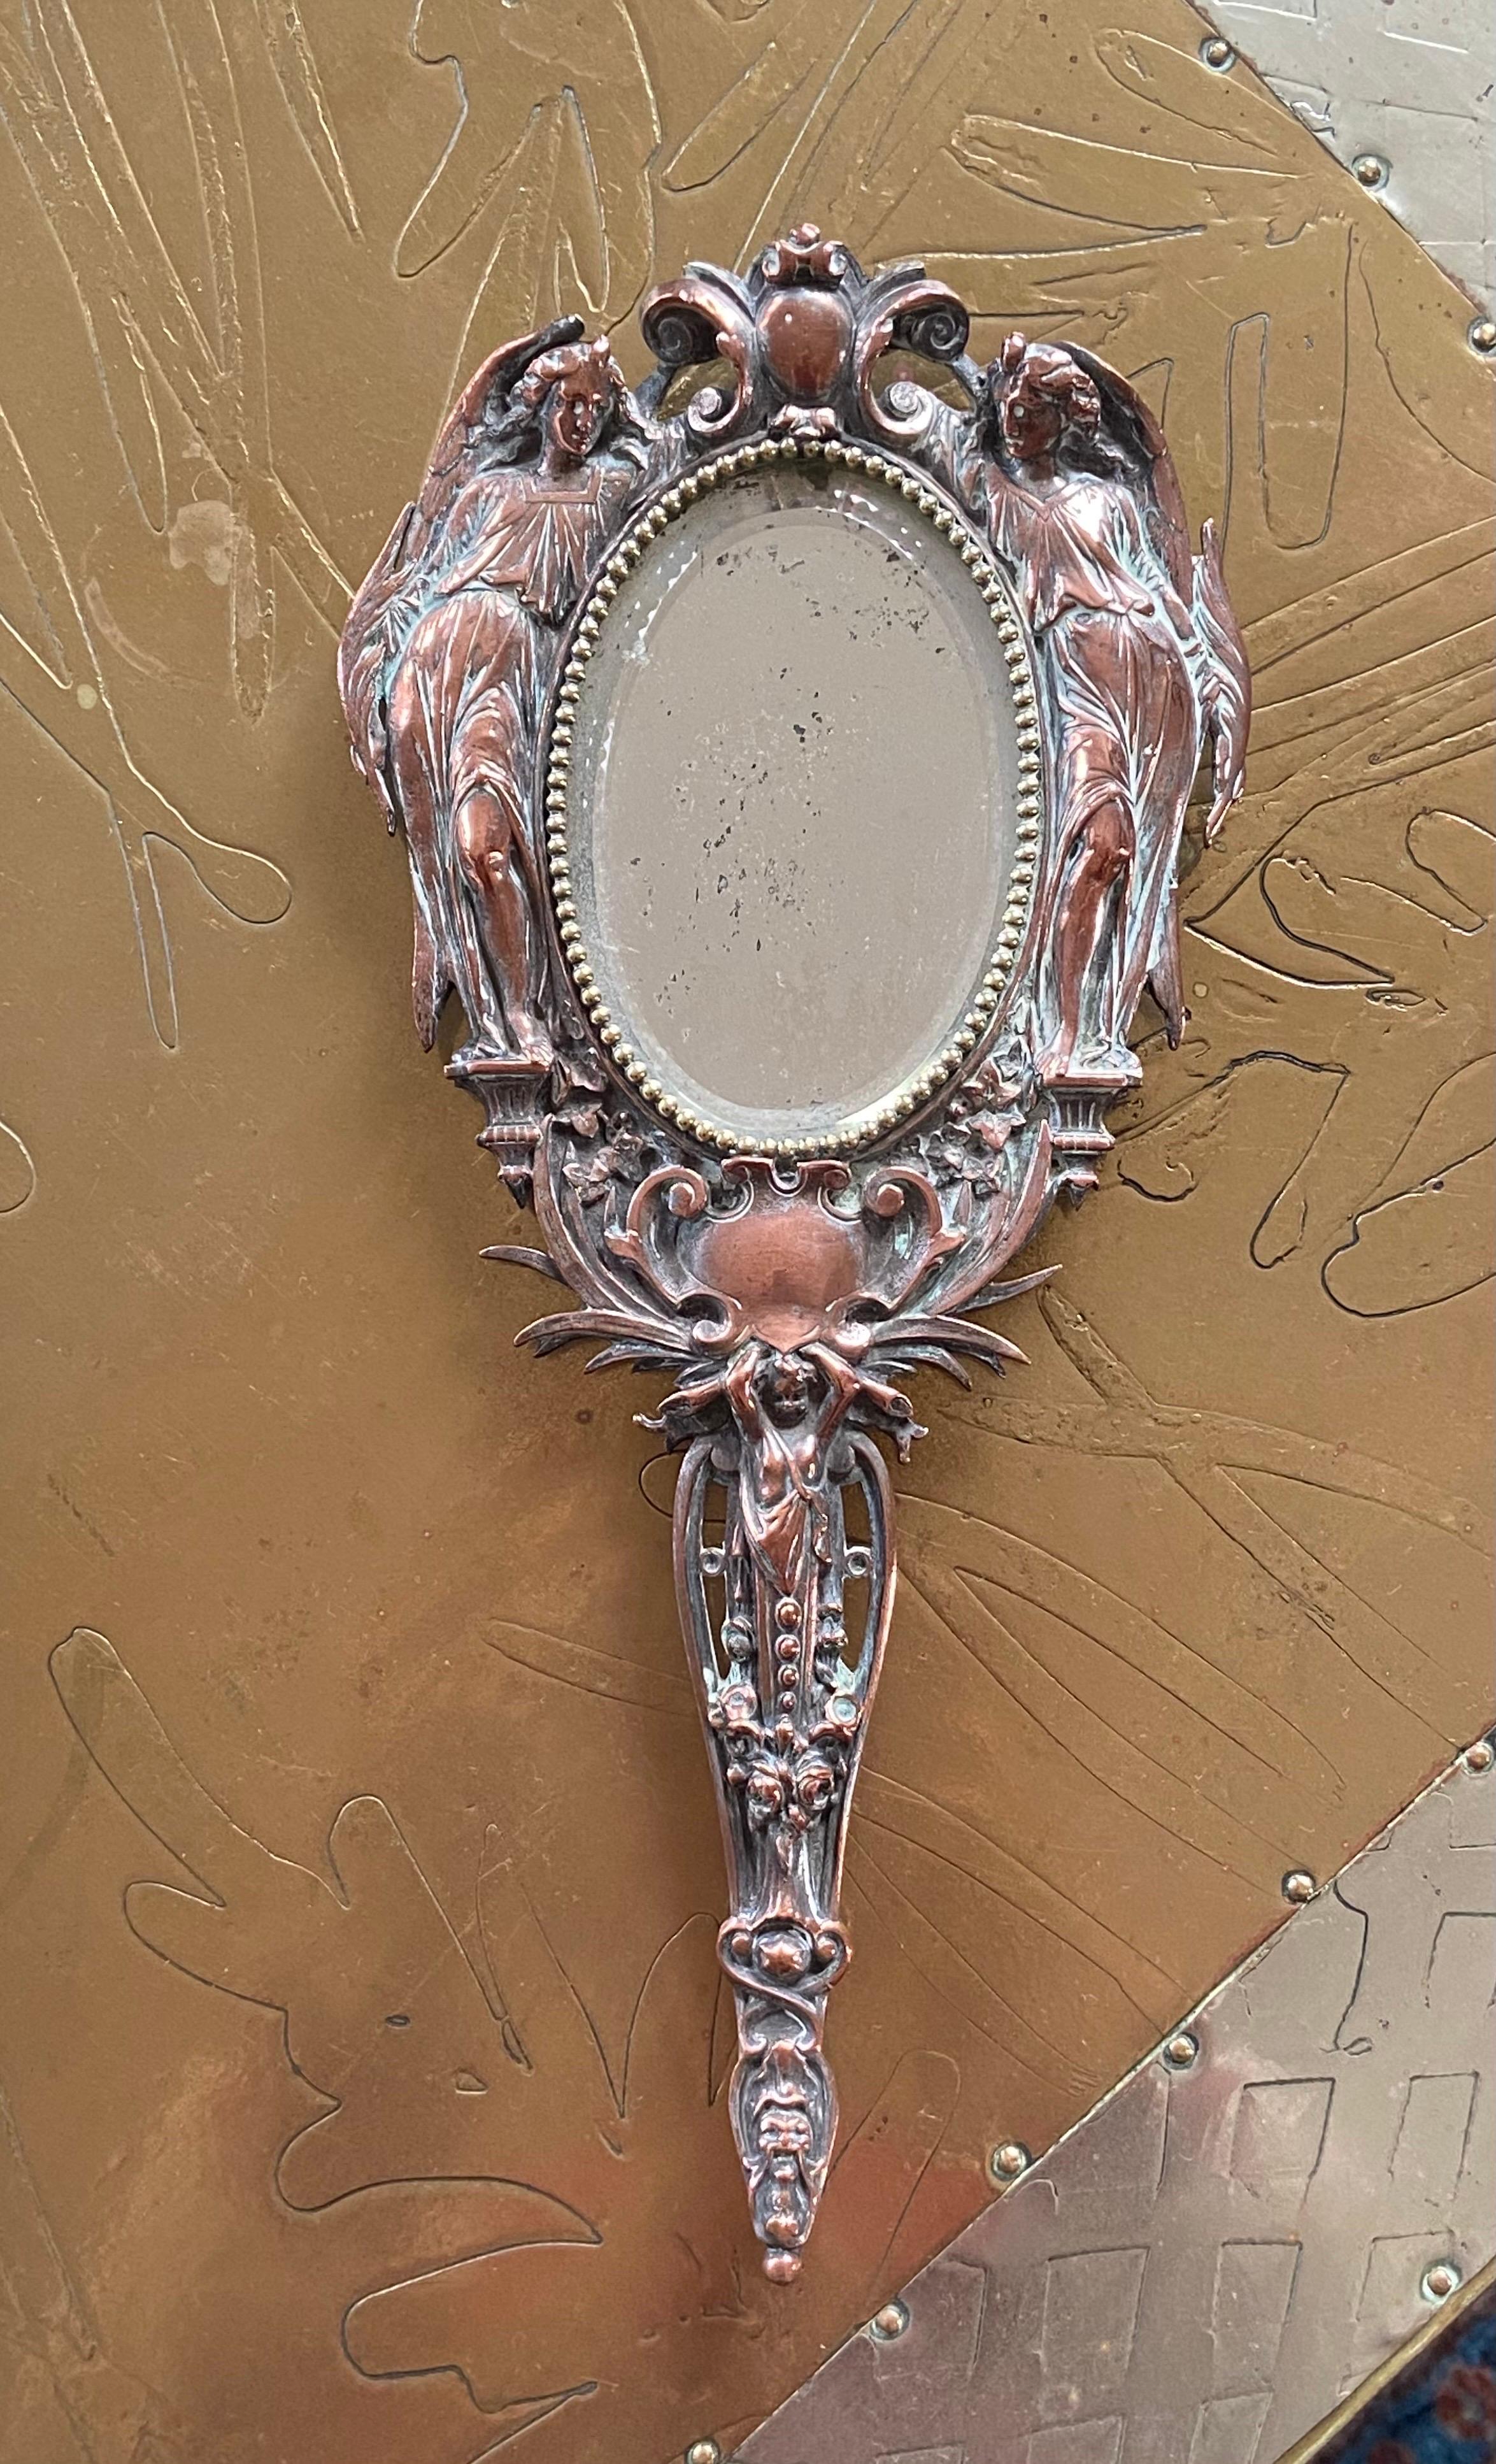 20th Century French hand mirror hand made in metal with two angels surrounding an oval mirror shape.
France, circa 1930.